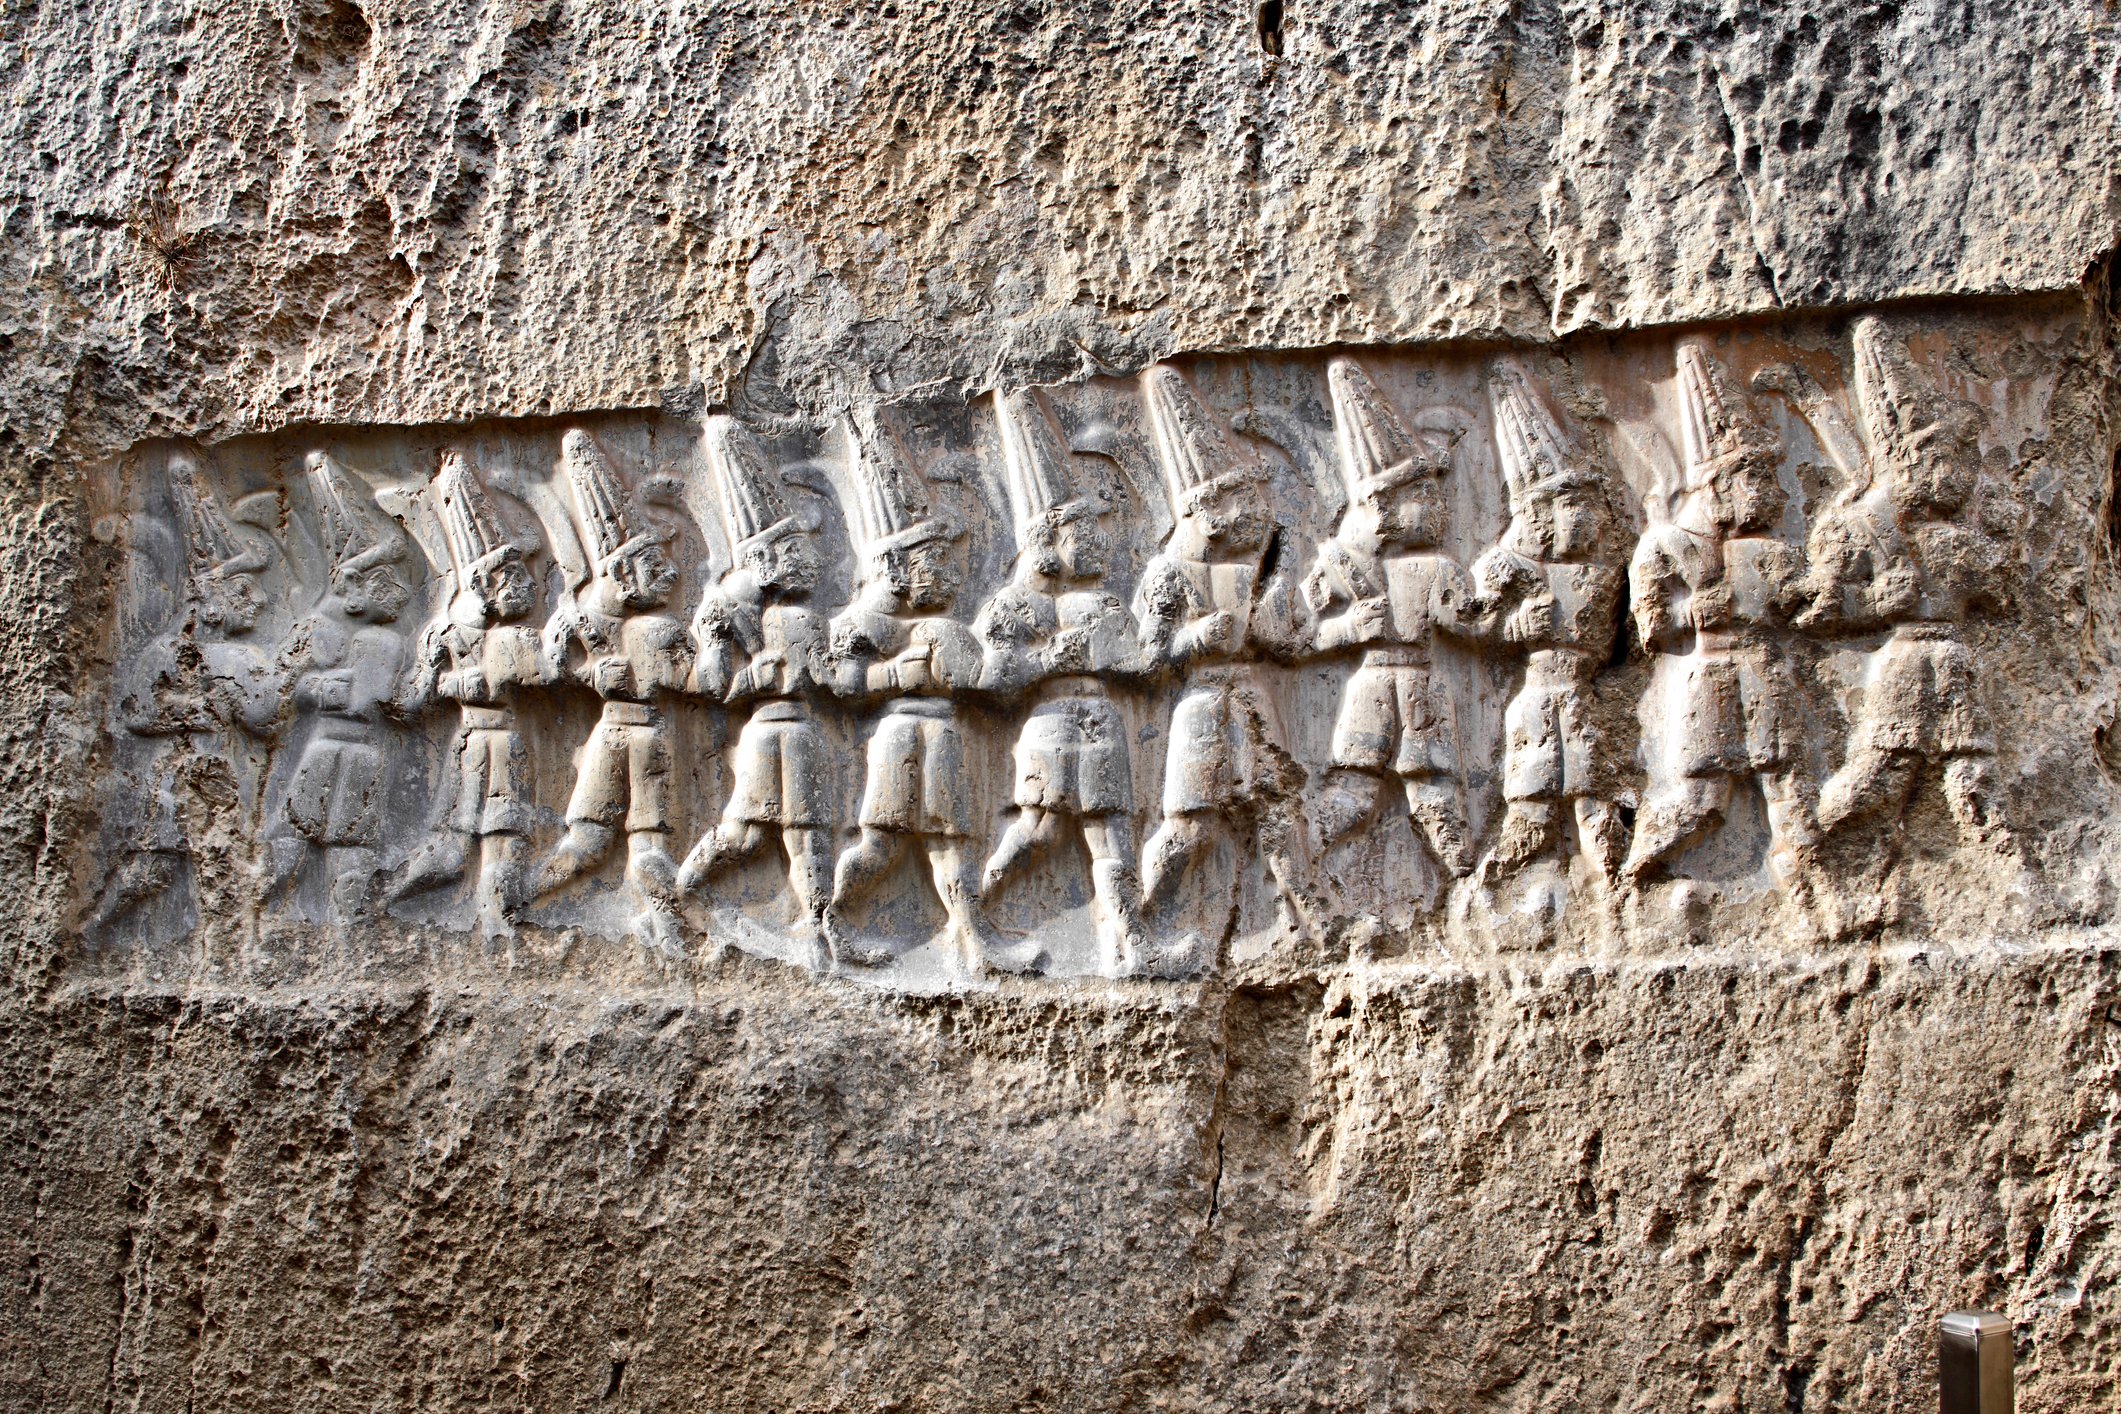 This picture shows the 12 gods of the Hittites on the walls of the Yazılıkaya sanctuary of Hattusa. (iStock Photo)